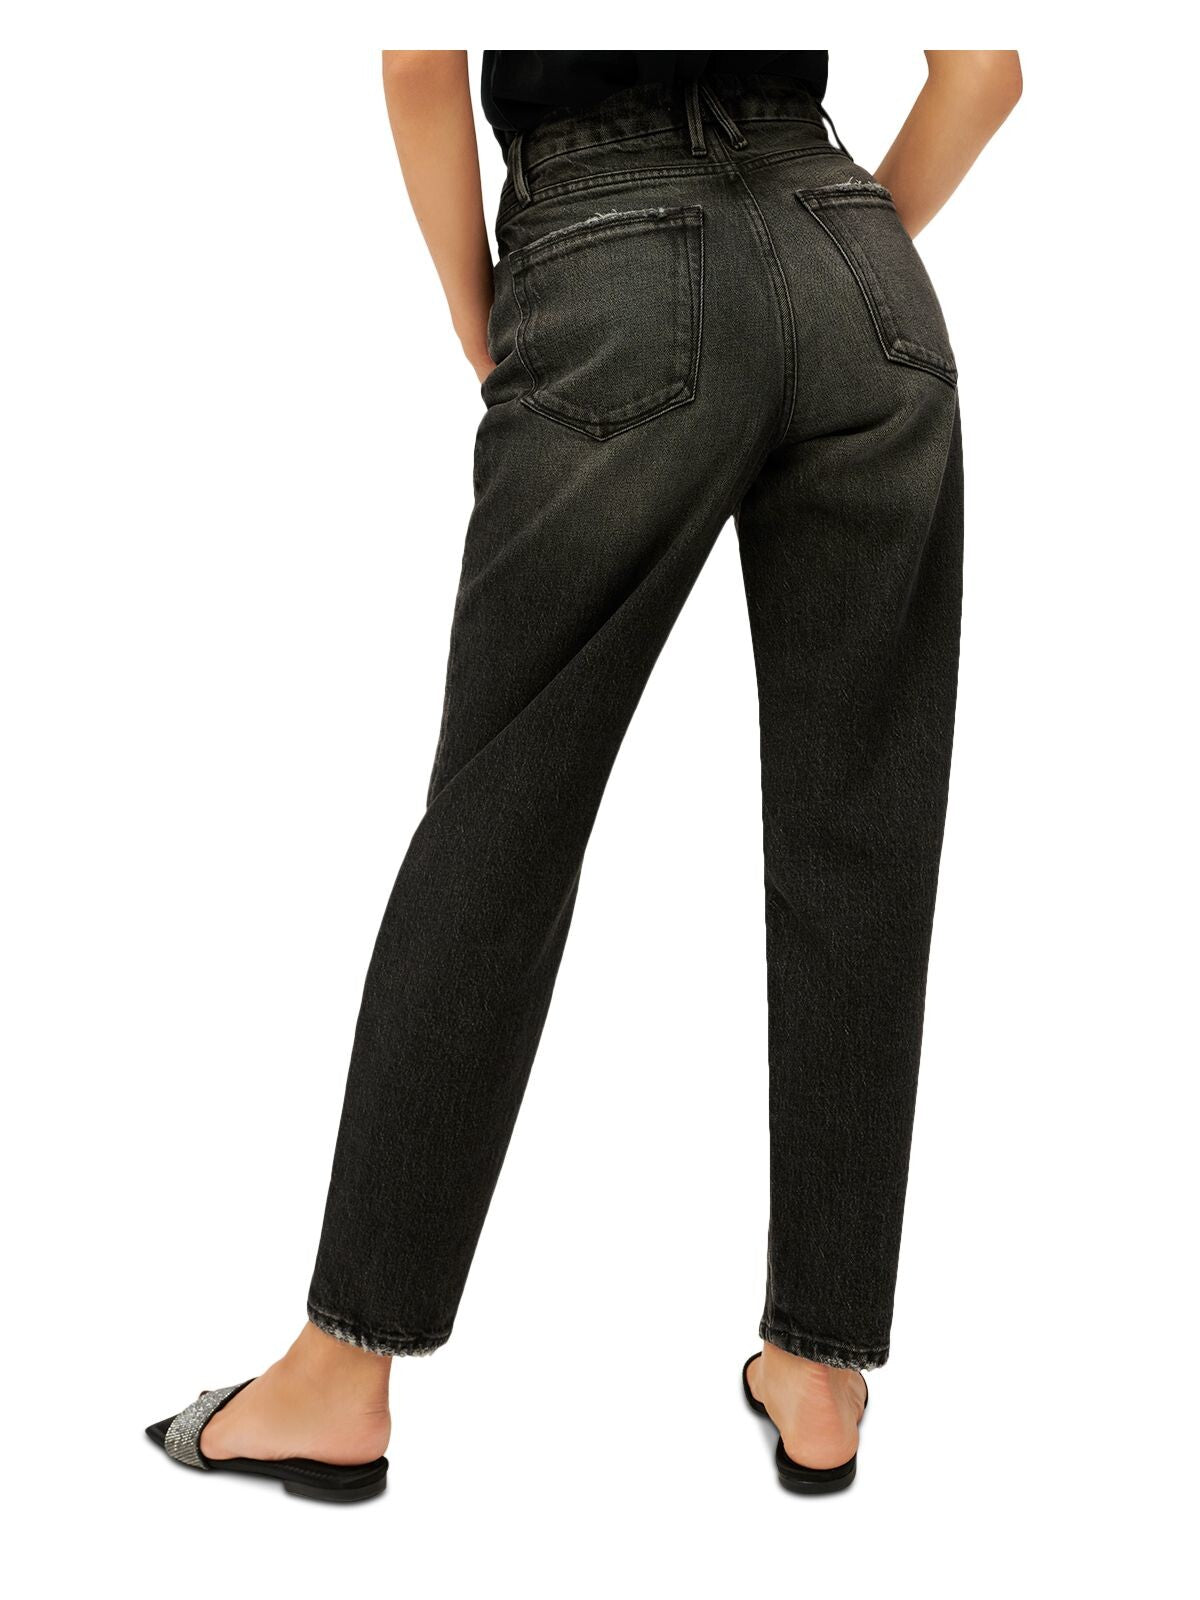 GOOD AMERICAN Womens Black Zippered Pocketed Tapered Fit Ankle Length High Waist Jeans 6